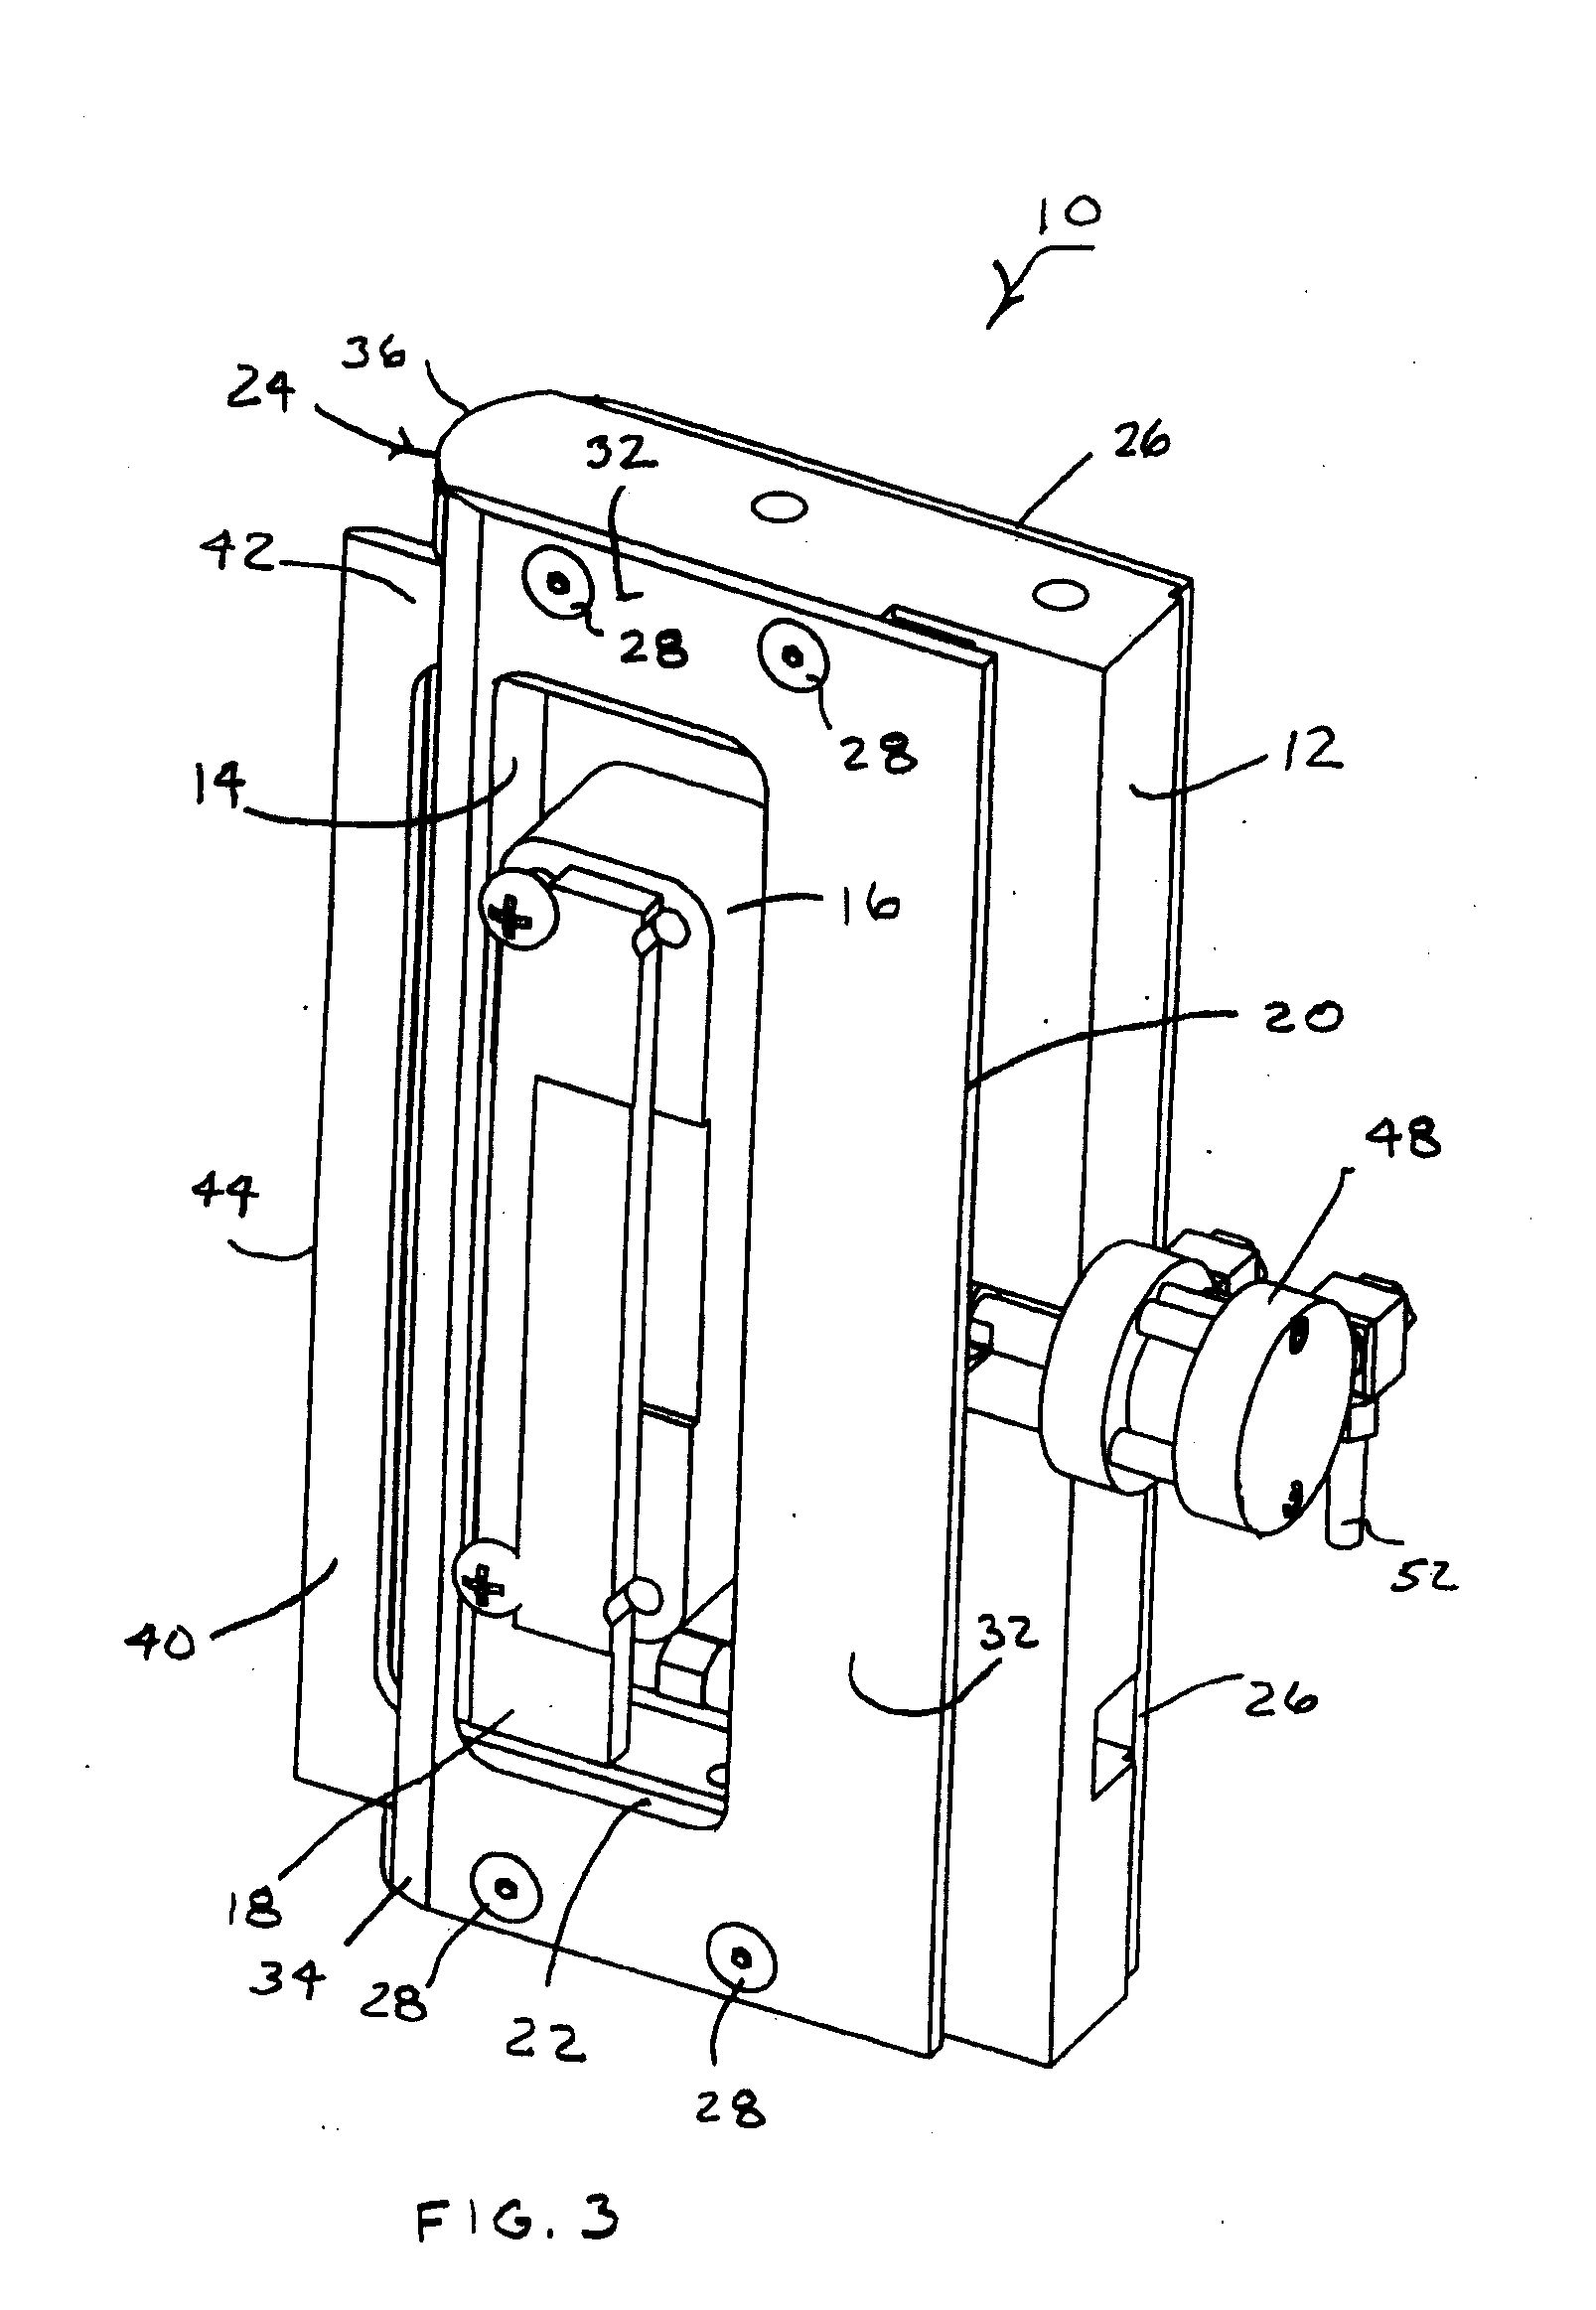 Peel plate assembly for removing programmable transponders from a web